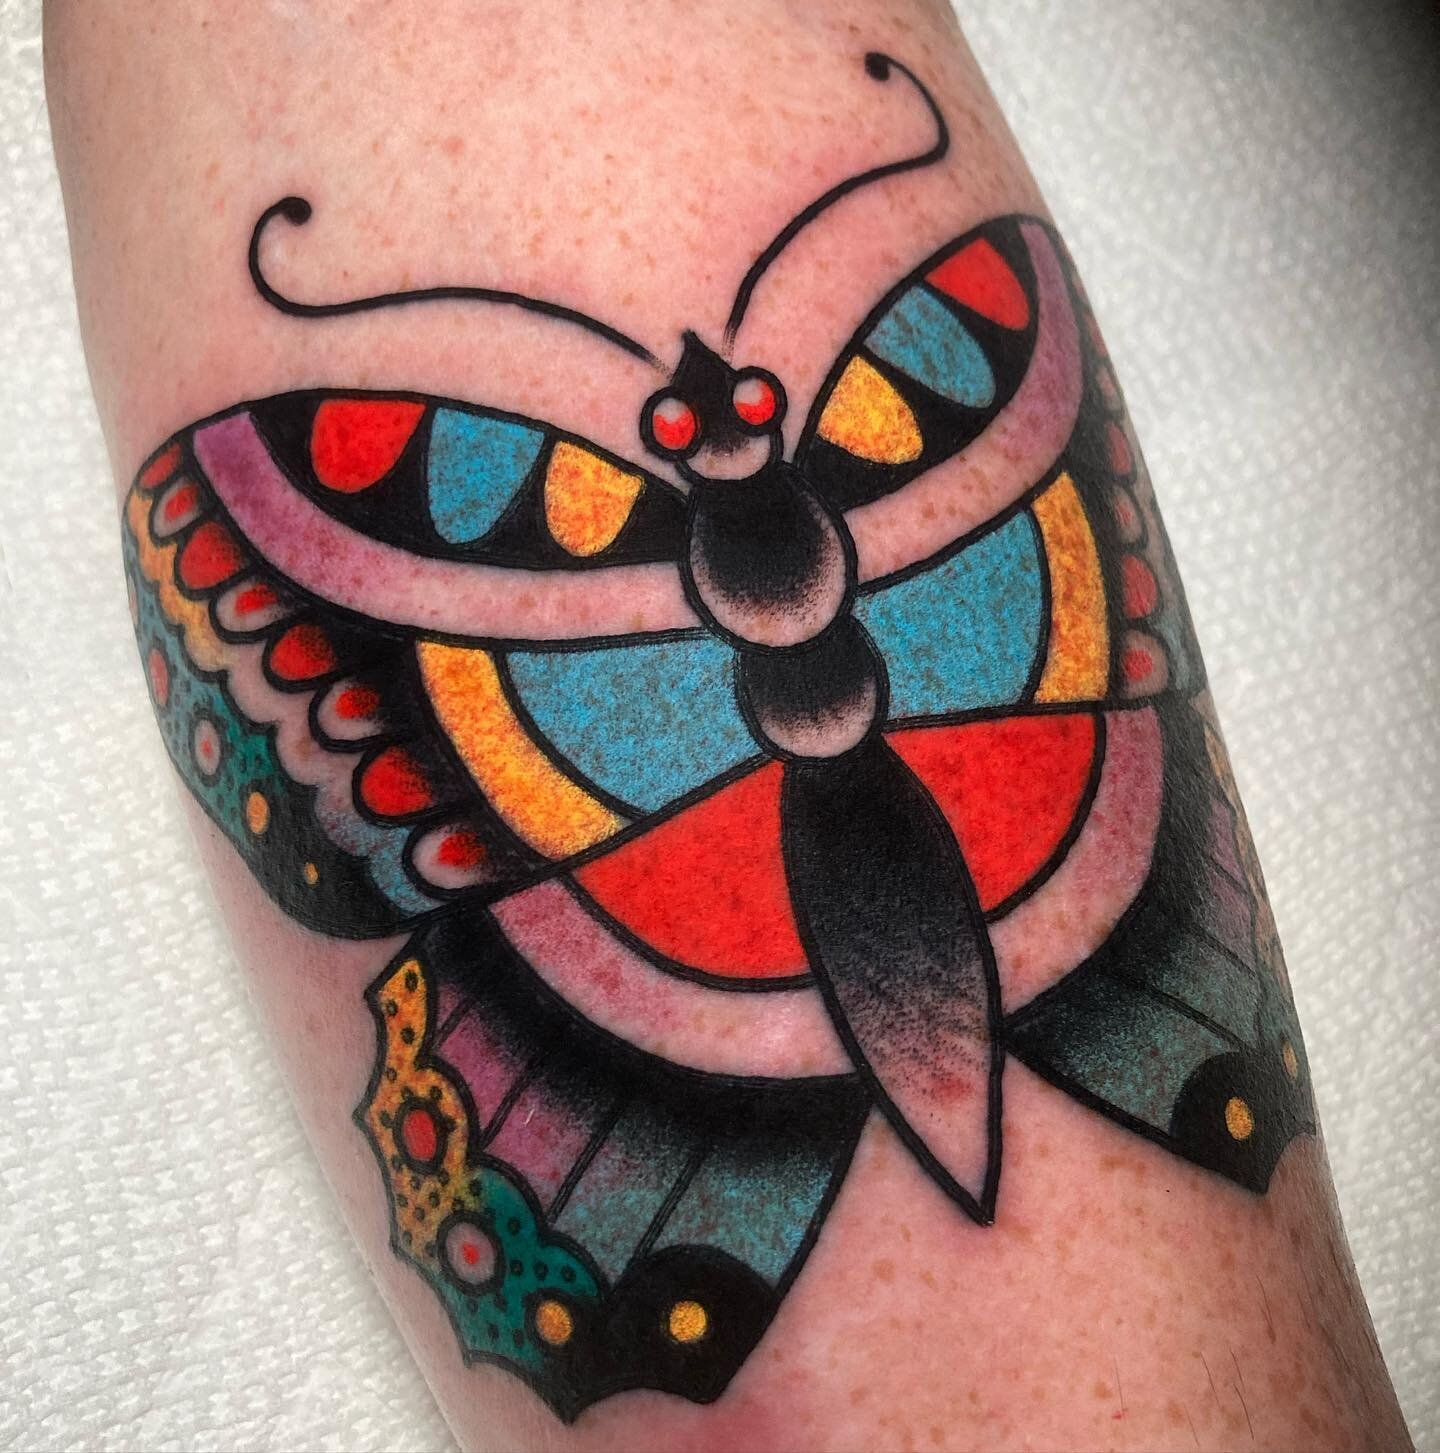 Day butterfly and night butterfly on @wjamescostello  @hotlinetattoo 

**************************************
To get on my waitlist, click the link in my Bio. If you're looking for something small, or a walk-in tattoo, feel free to call the shop at
5